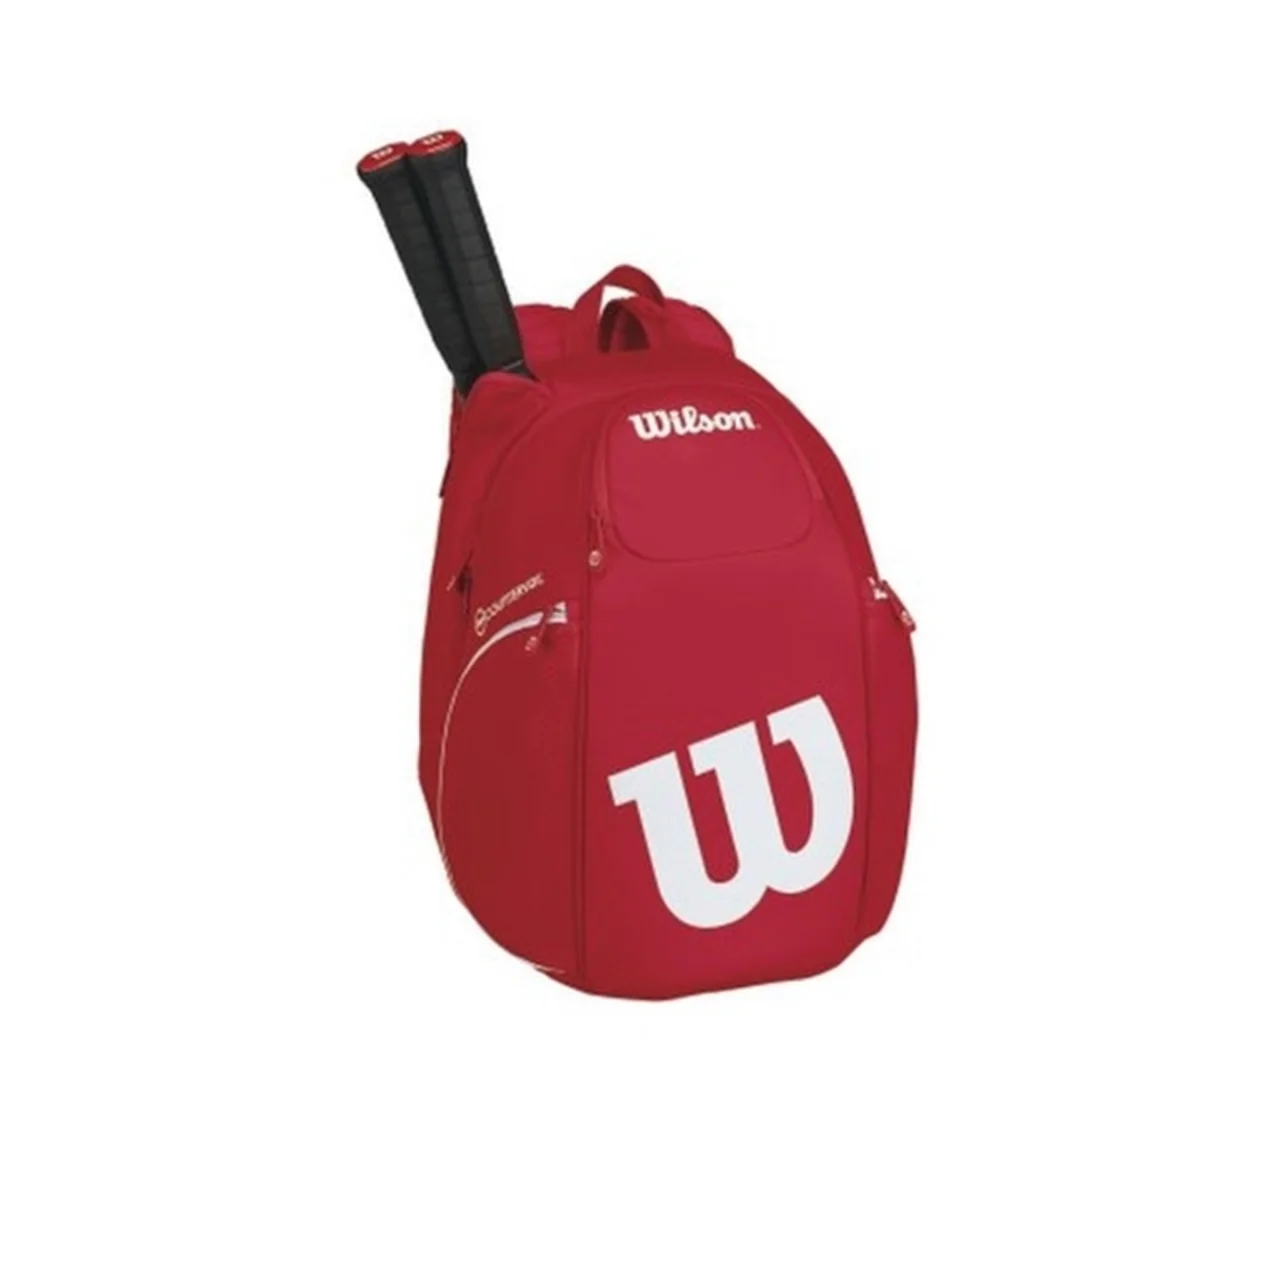 Wilson Vancouver Backpack Red